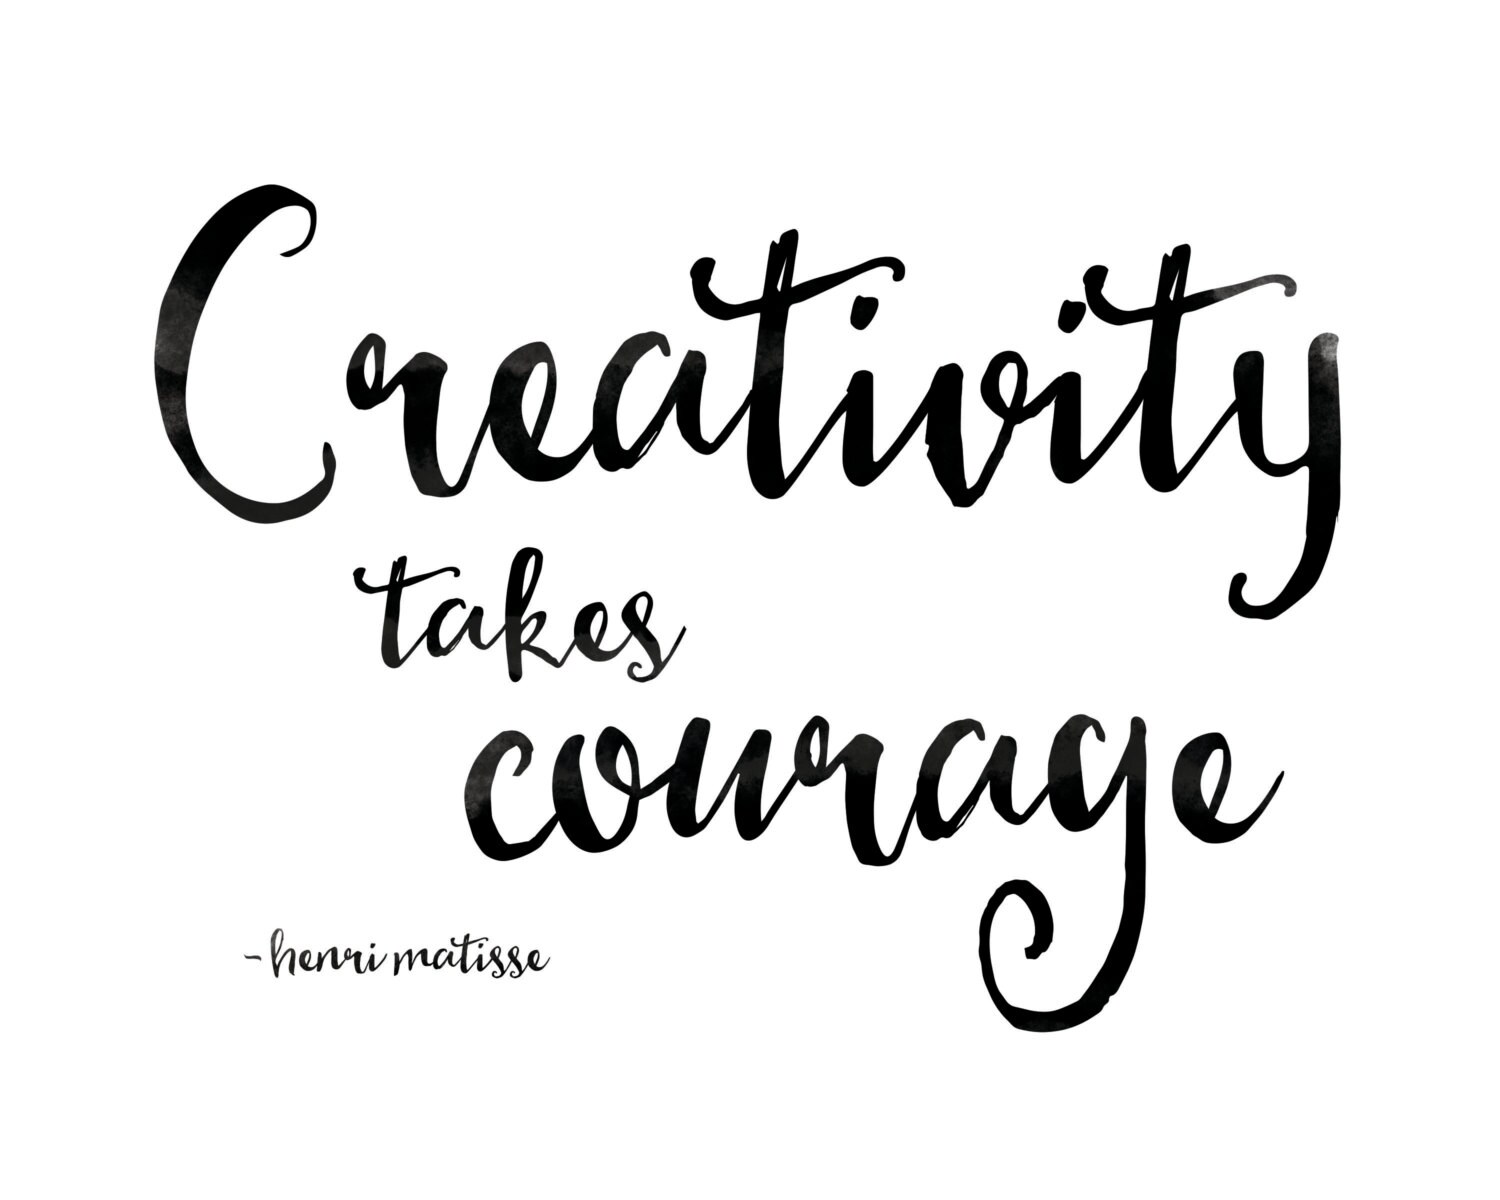 Creativity takes courage quote print 8 x 10 instant download | Etsy